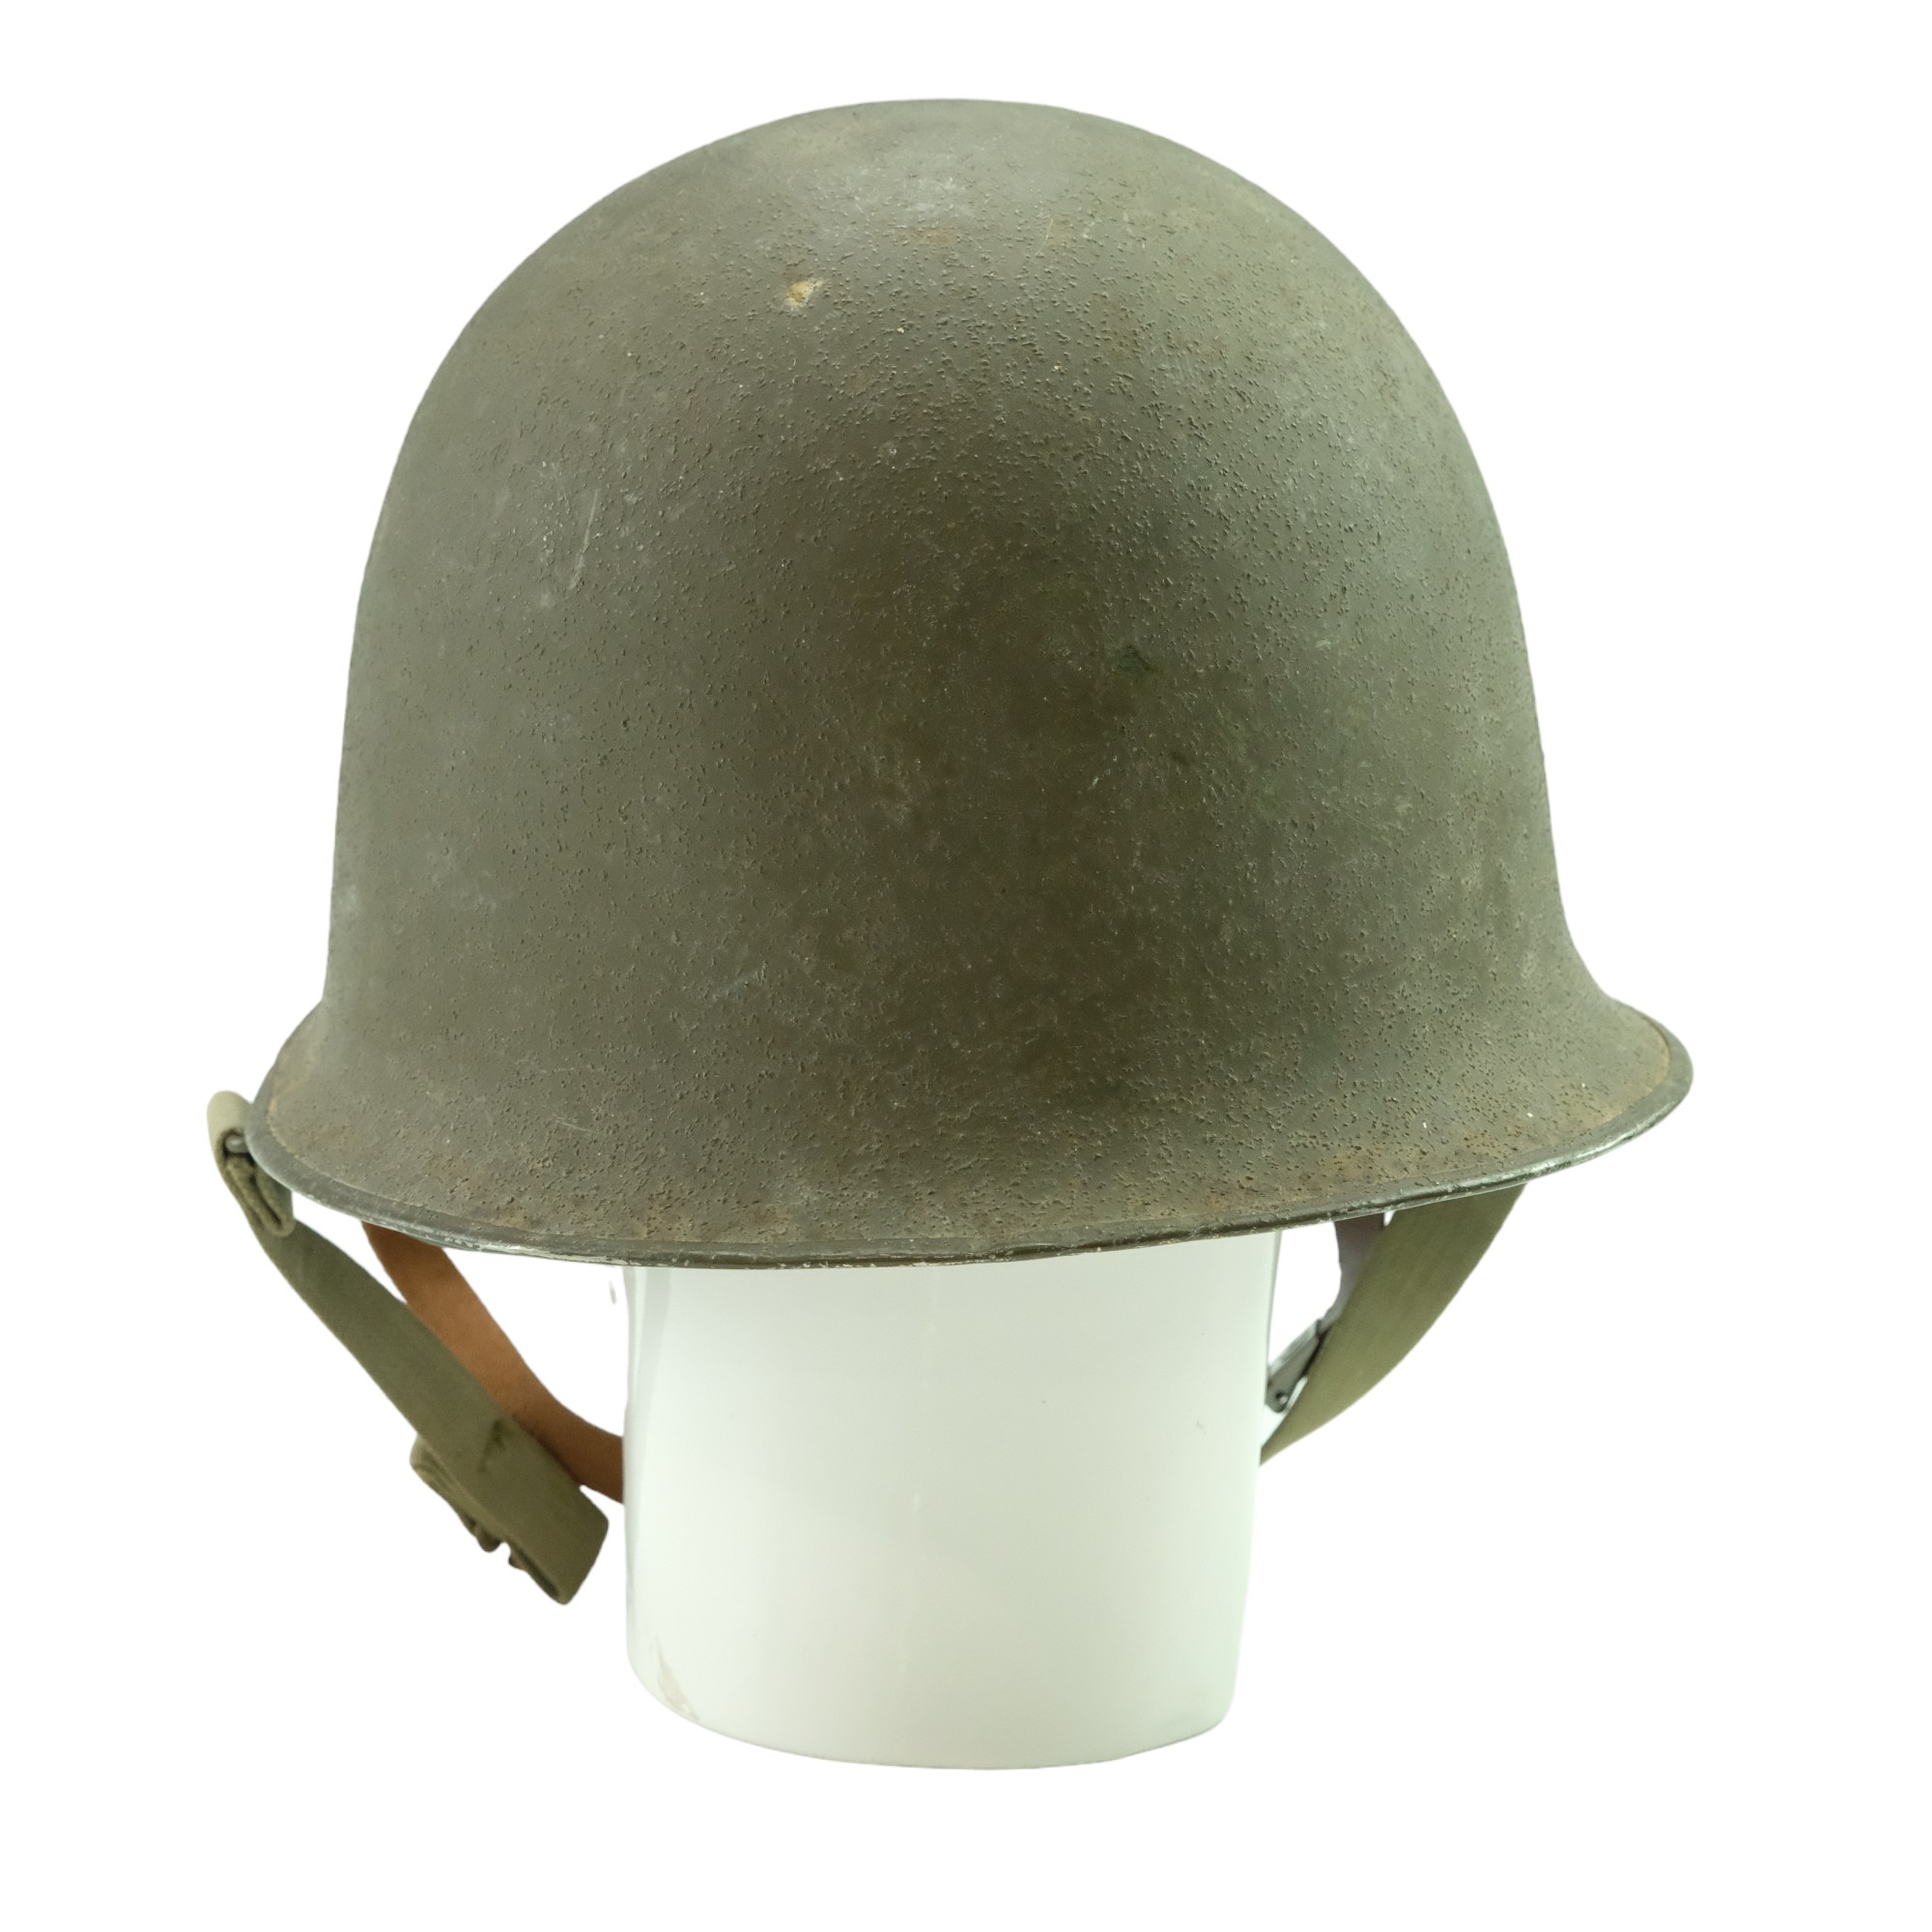 A French M1 style Helmet - Image 4 of 7